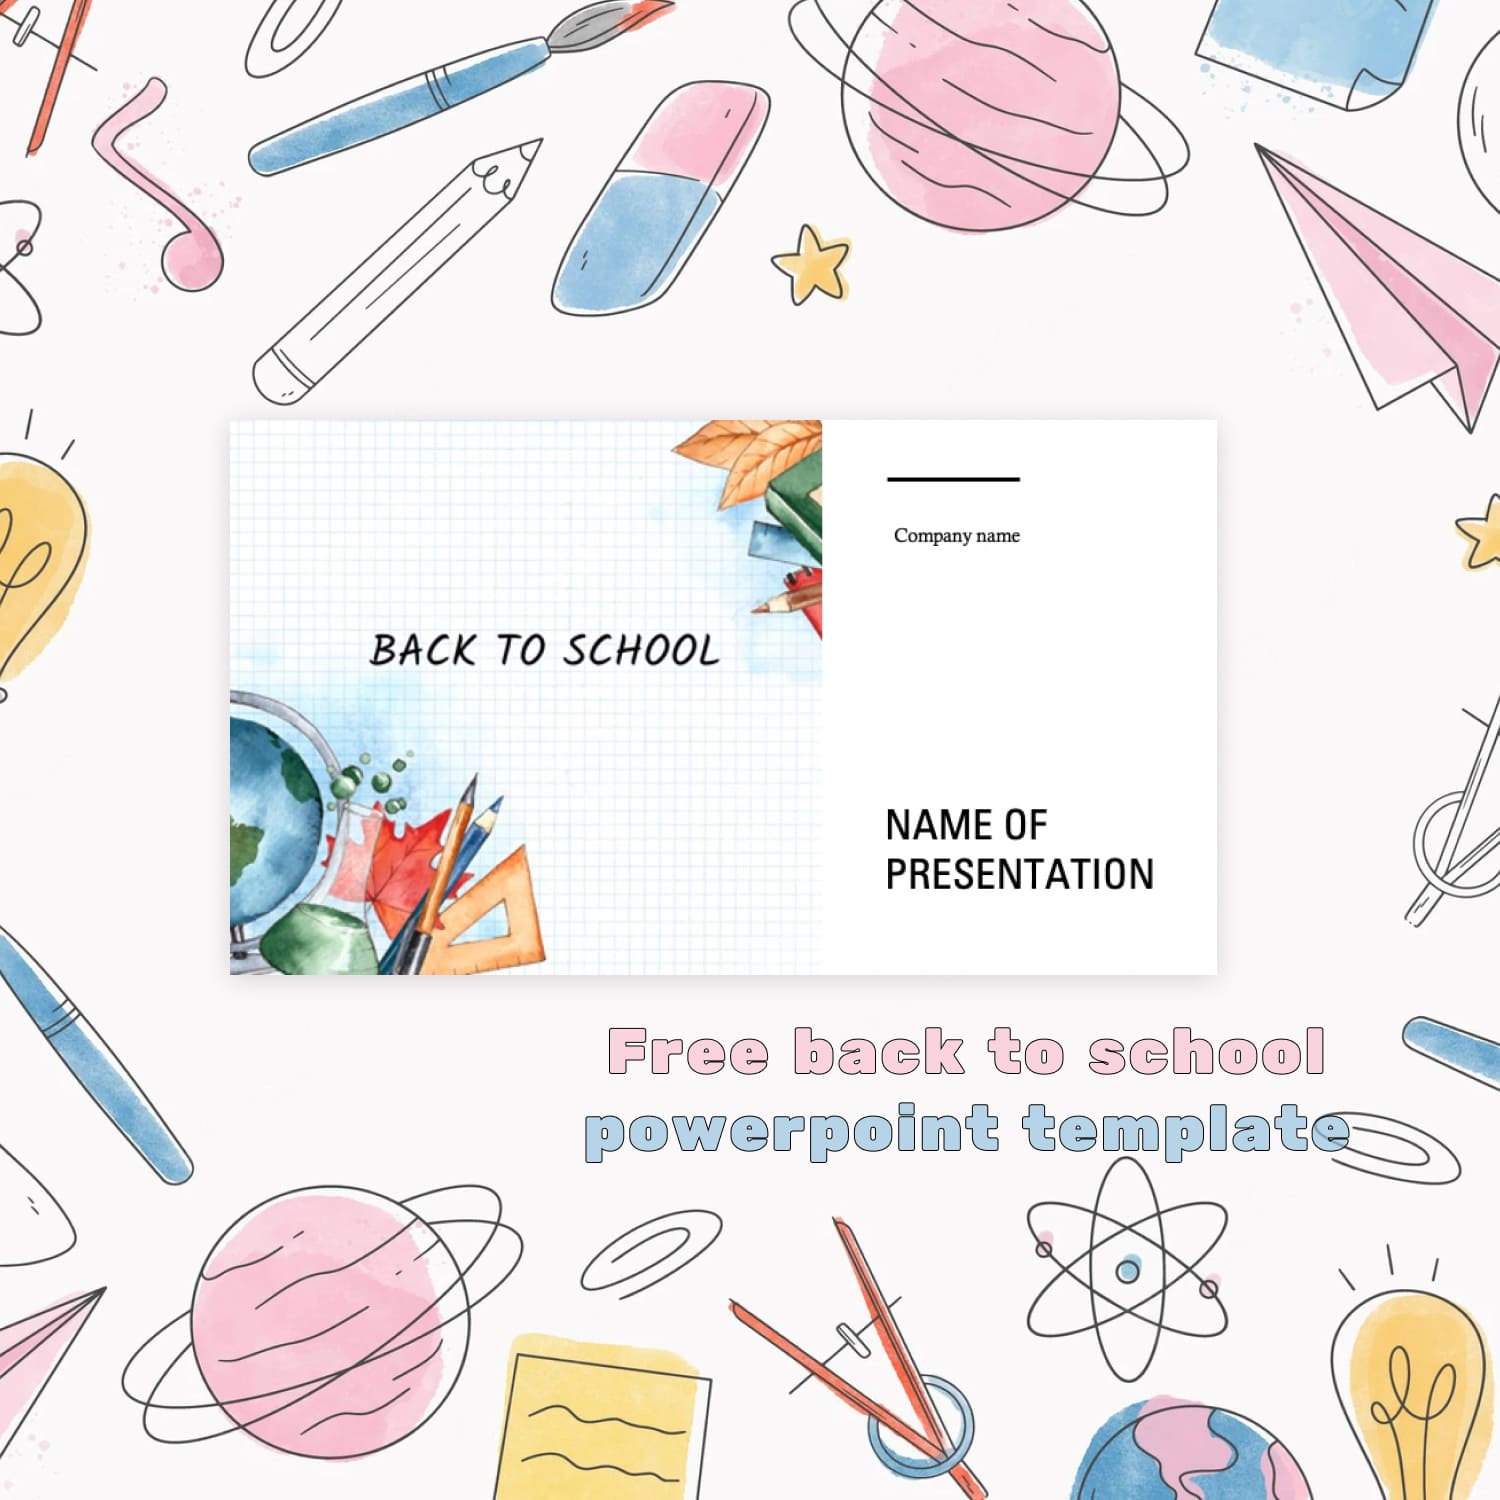 1500 1 Free Back To School Powerpoint Template.